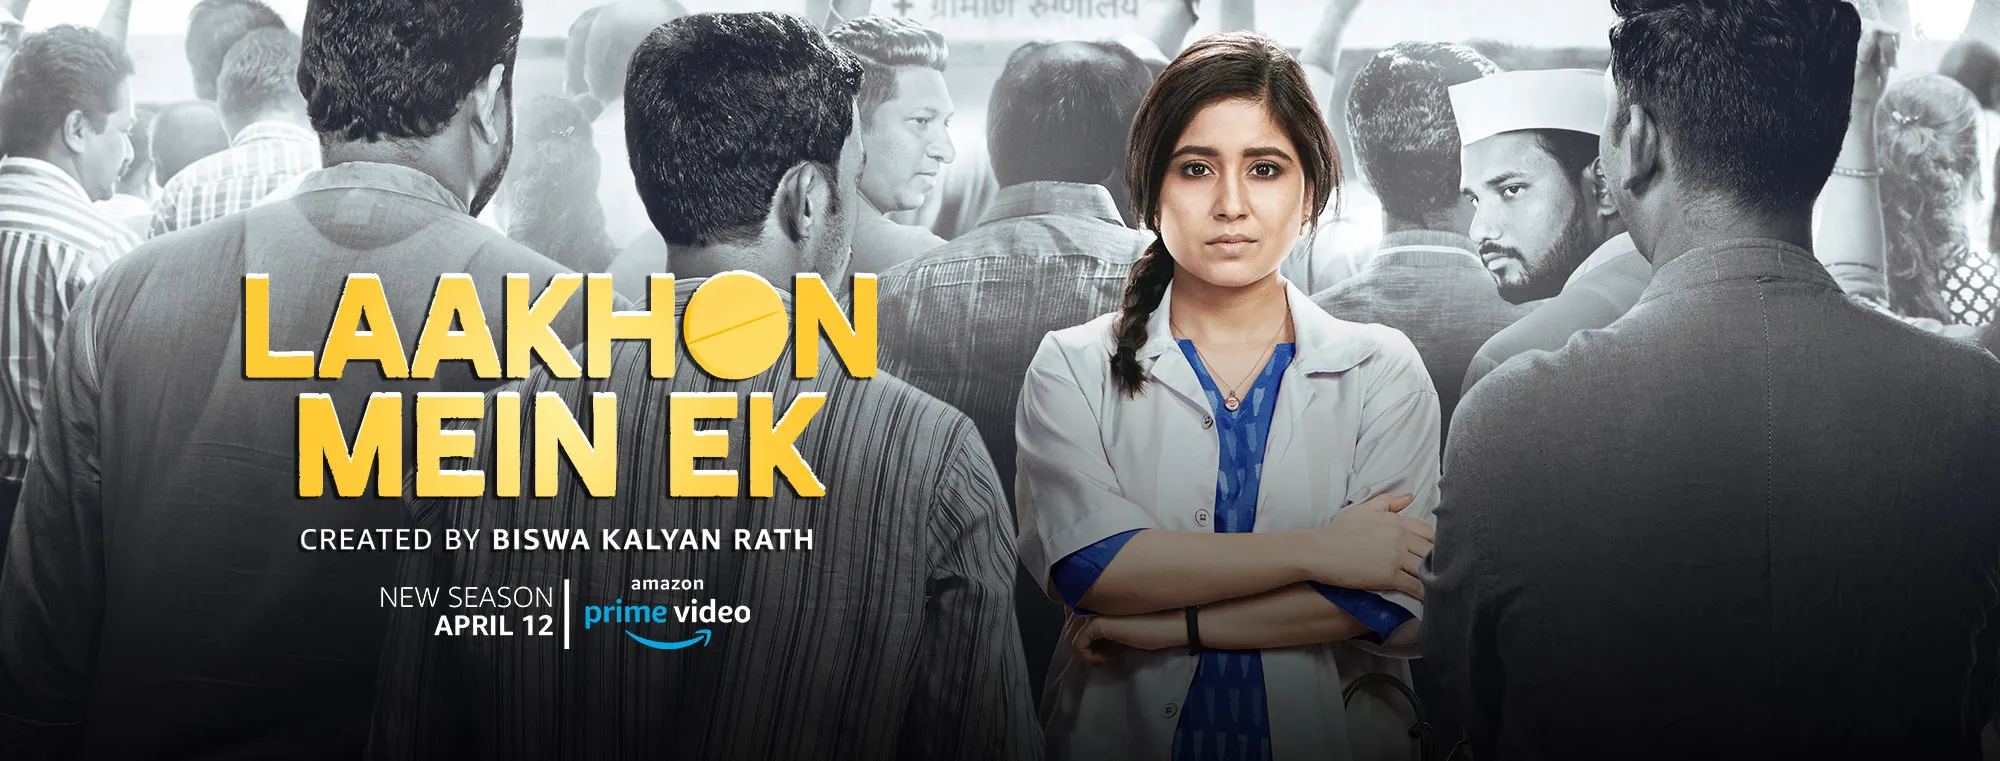 [HerStoryRecommends] Laakhon Mein Ek on Amazon is hard-hitting; curl up ...